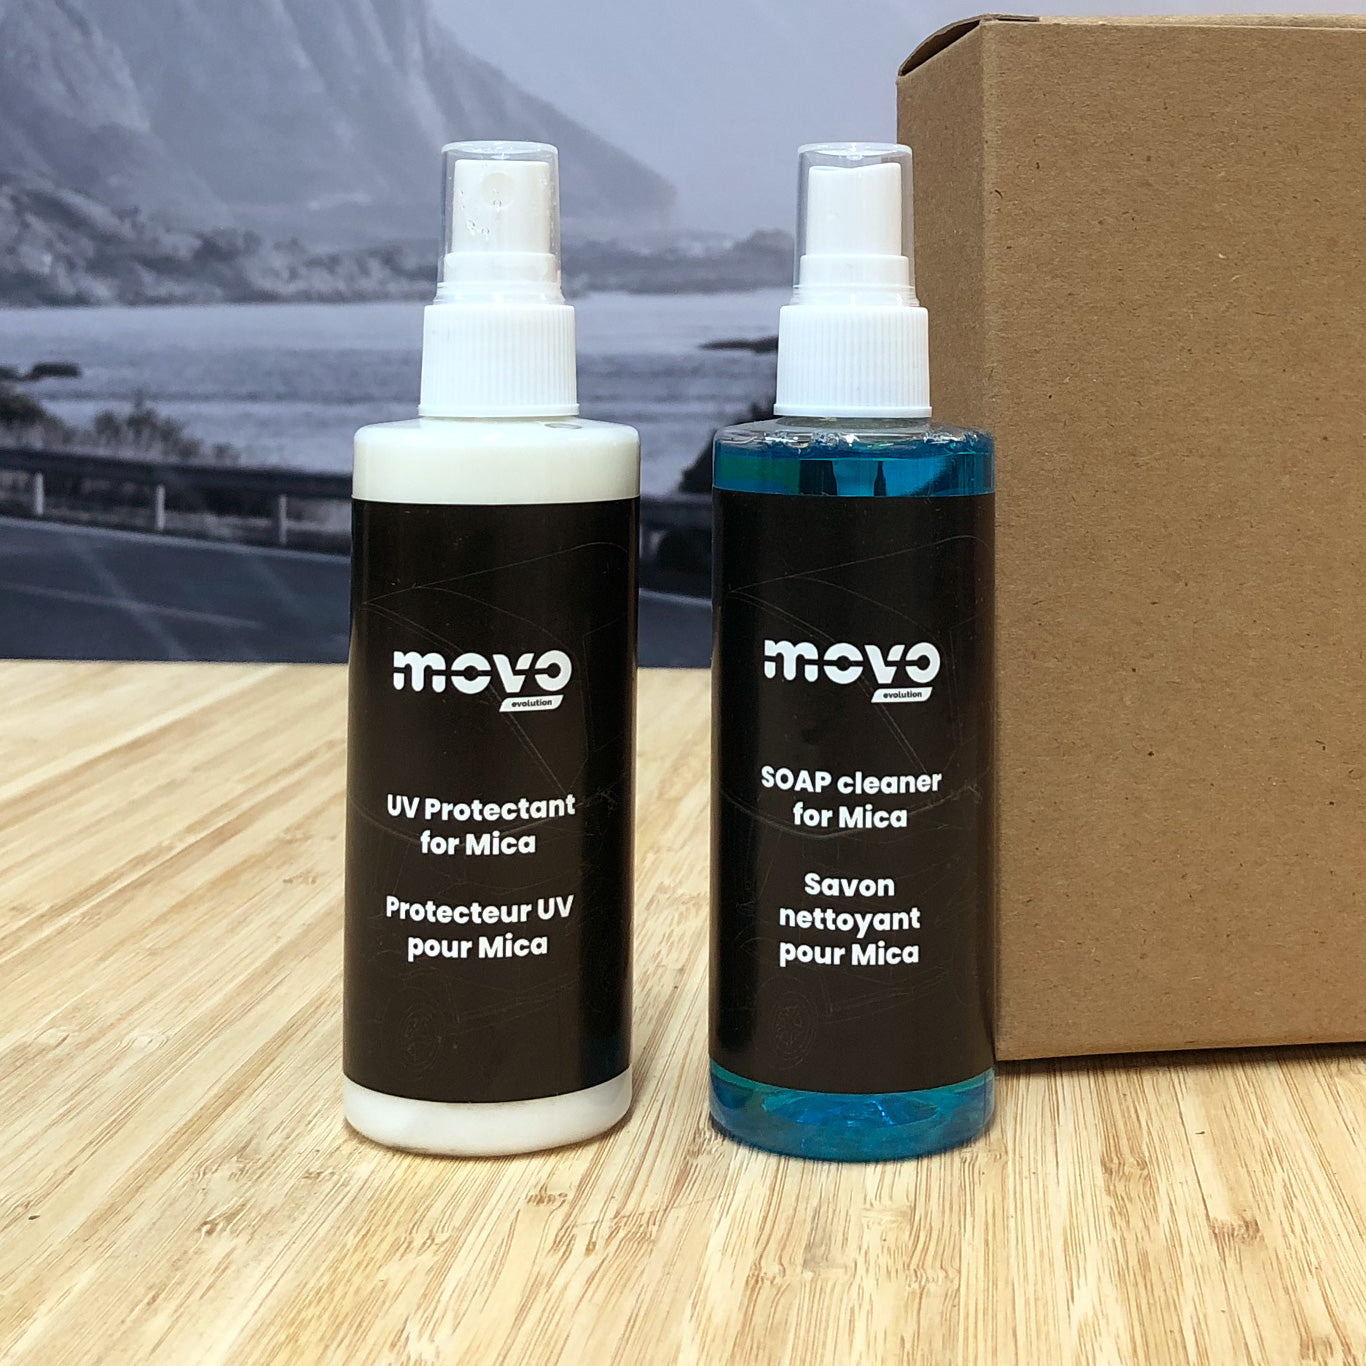 Kit – UV Protectant and SOAP cleaner for Mica